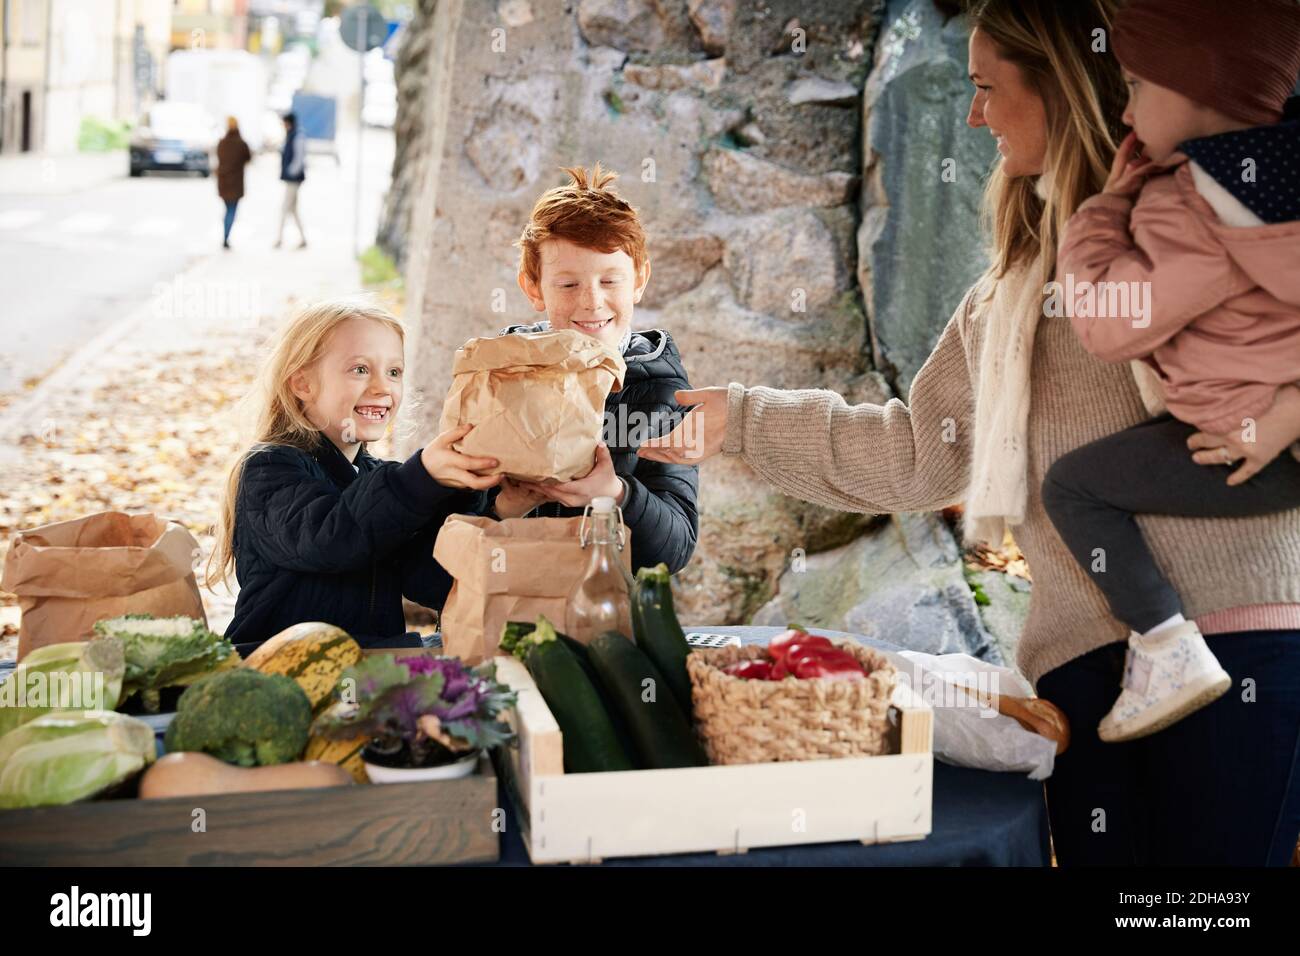 Smiling male and female sibling buying vegetables from female market vendor Stock Photo